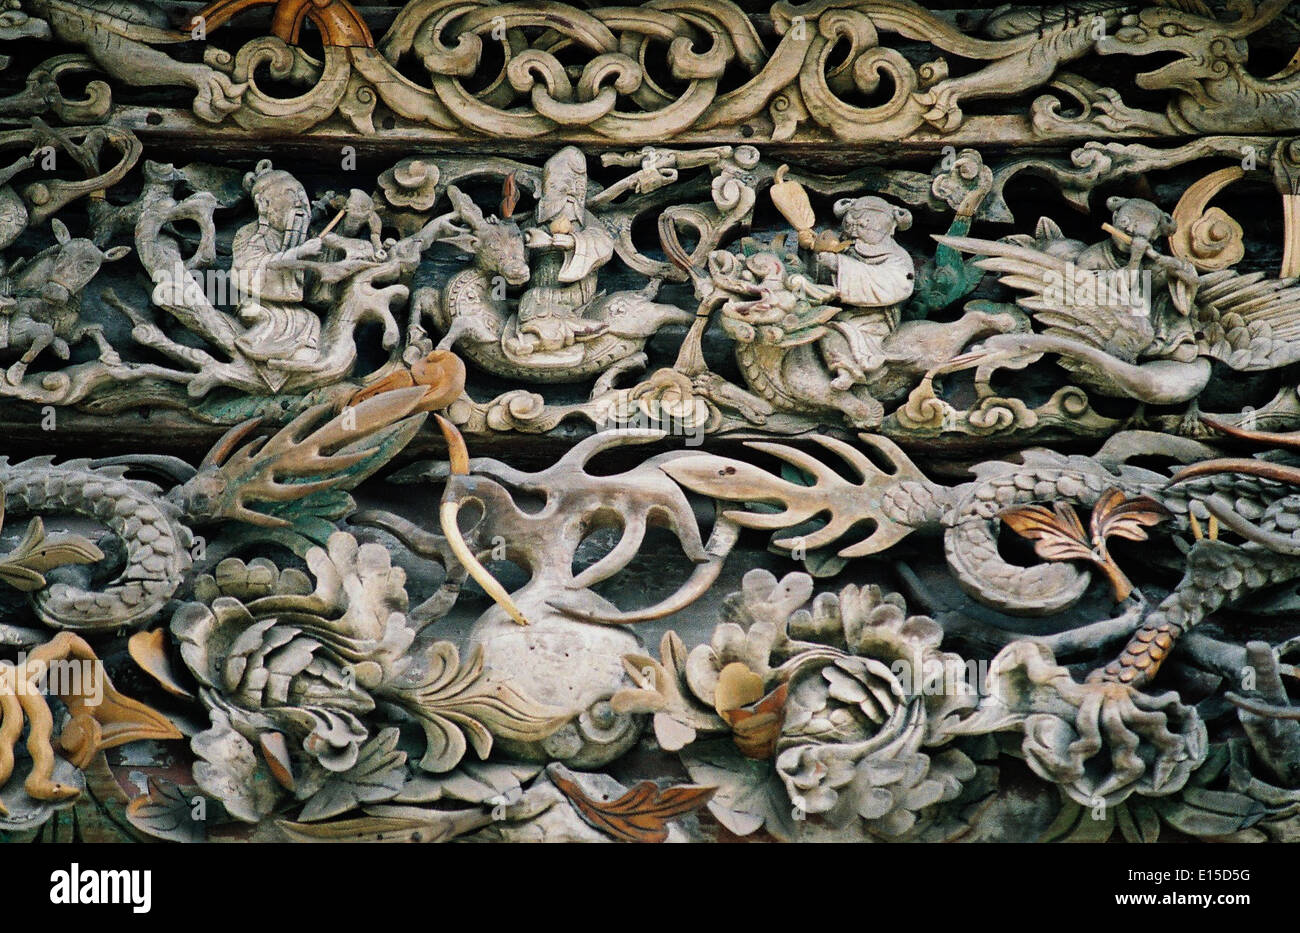 (140523) -- ZHENGZHOU, May 23, 2014 (Xinhua) -- Photo taken on March 6, 2006 shows wood sculptures under the eaves of the main hall of the Shanxi-Shaanxi-Gansu Guild in Kaifeng, central China's Henan Province. A large number of architectural sculptures have been preserved in historical sites of Henan, which is one of the cradles of the Chinese civilization. Many of the sculptures, created from stones, bricks, or wood, were used as building parts of residences, shrines and memorial archways, among other architecture types. Underlining both the mood and the details, these sculptures have themes Stock Photo